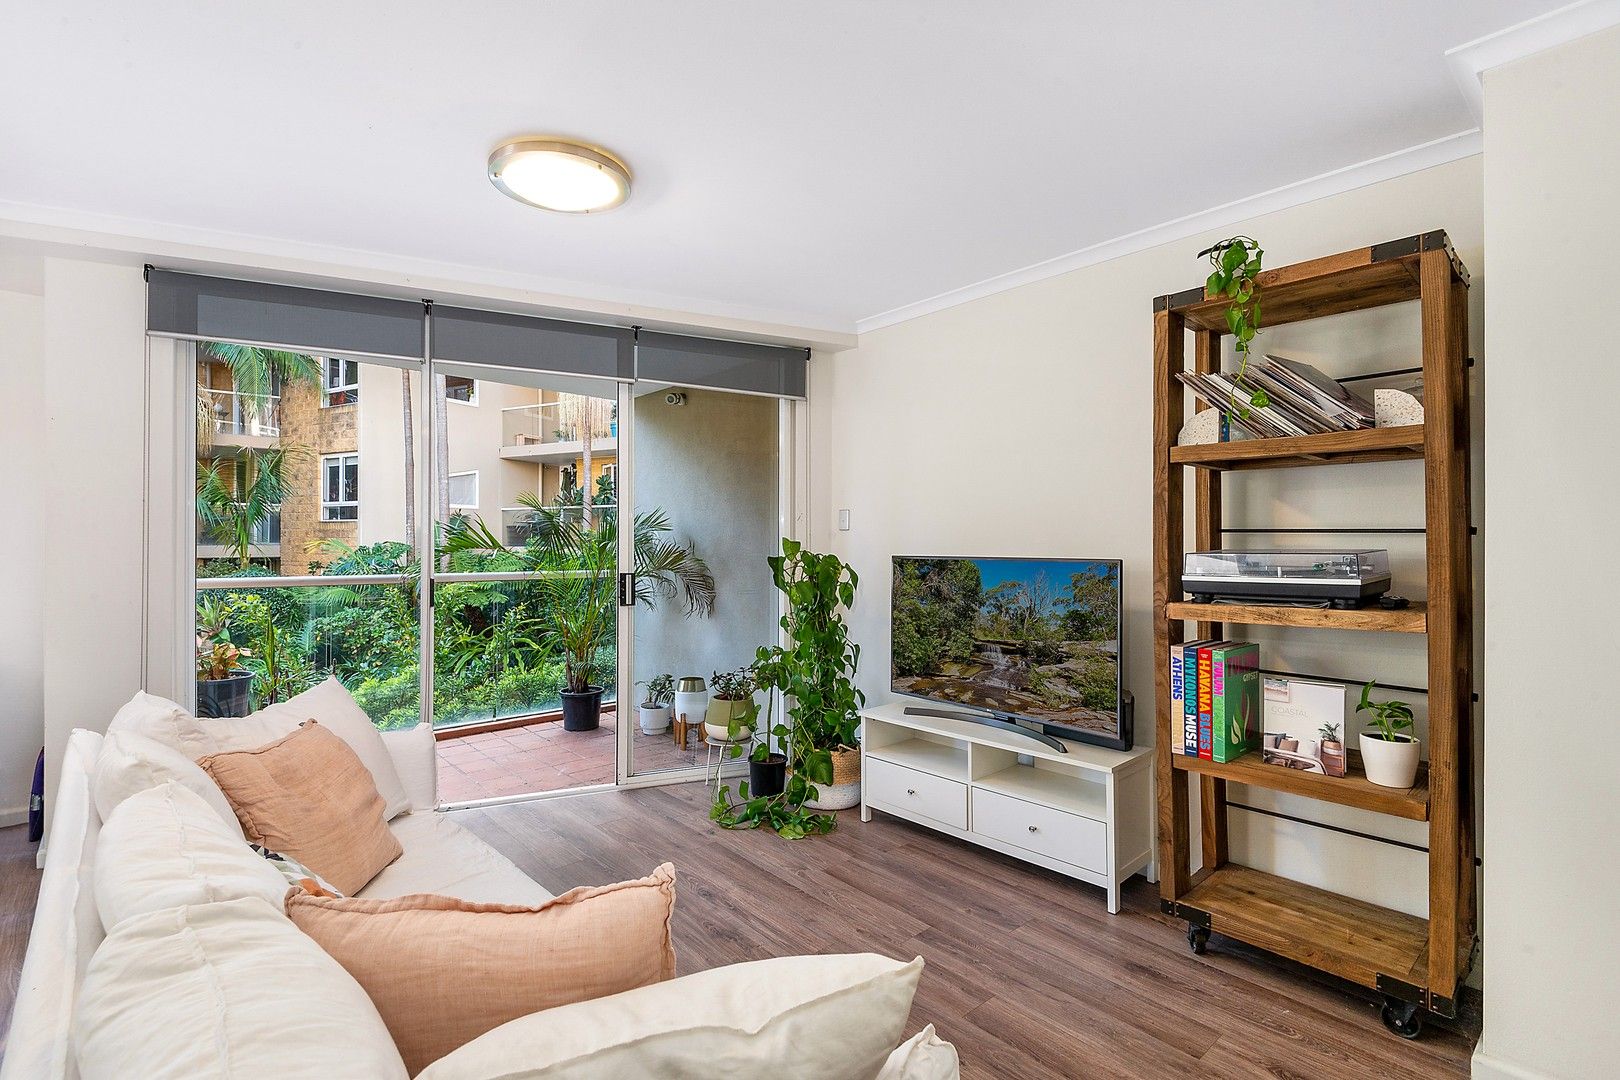 2 bedrooms Apartment / Unit / Flat in 3/10 Bloomfield Street SURRY HILLS NSW, 2010